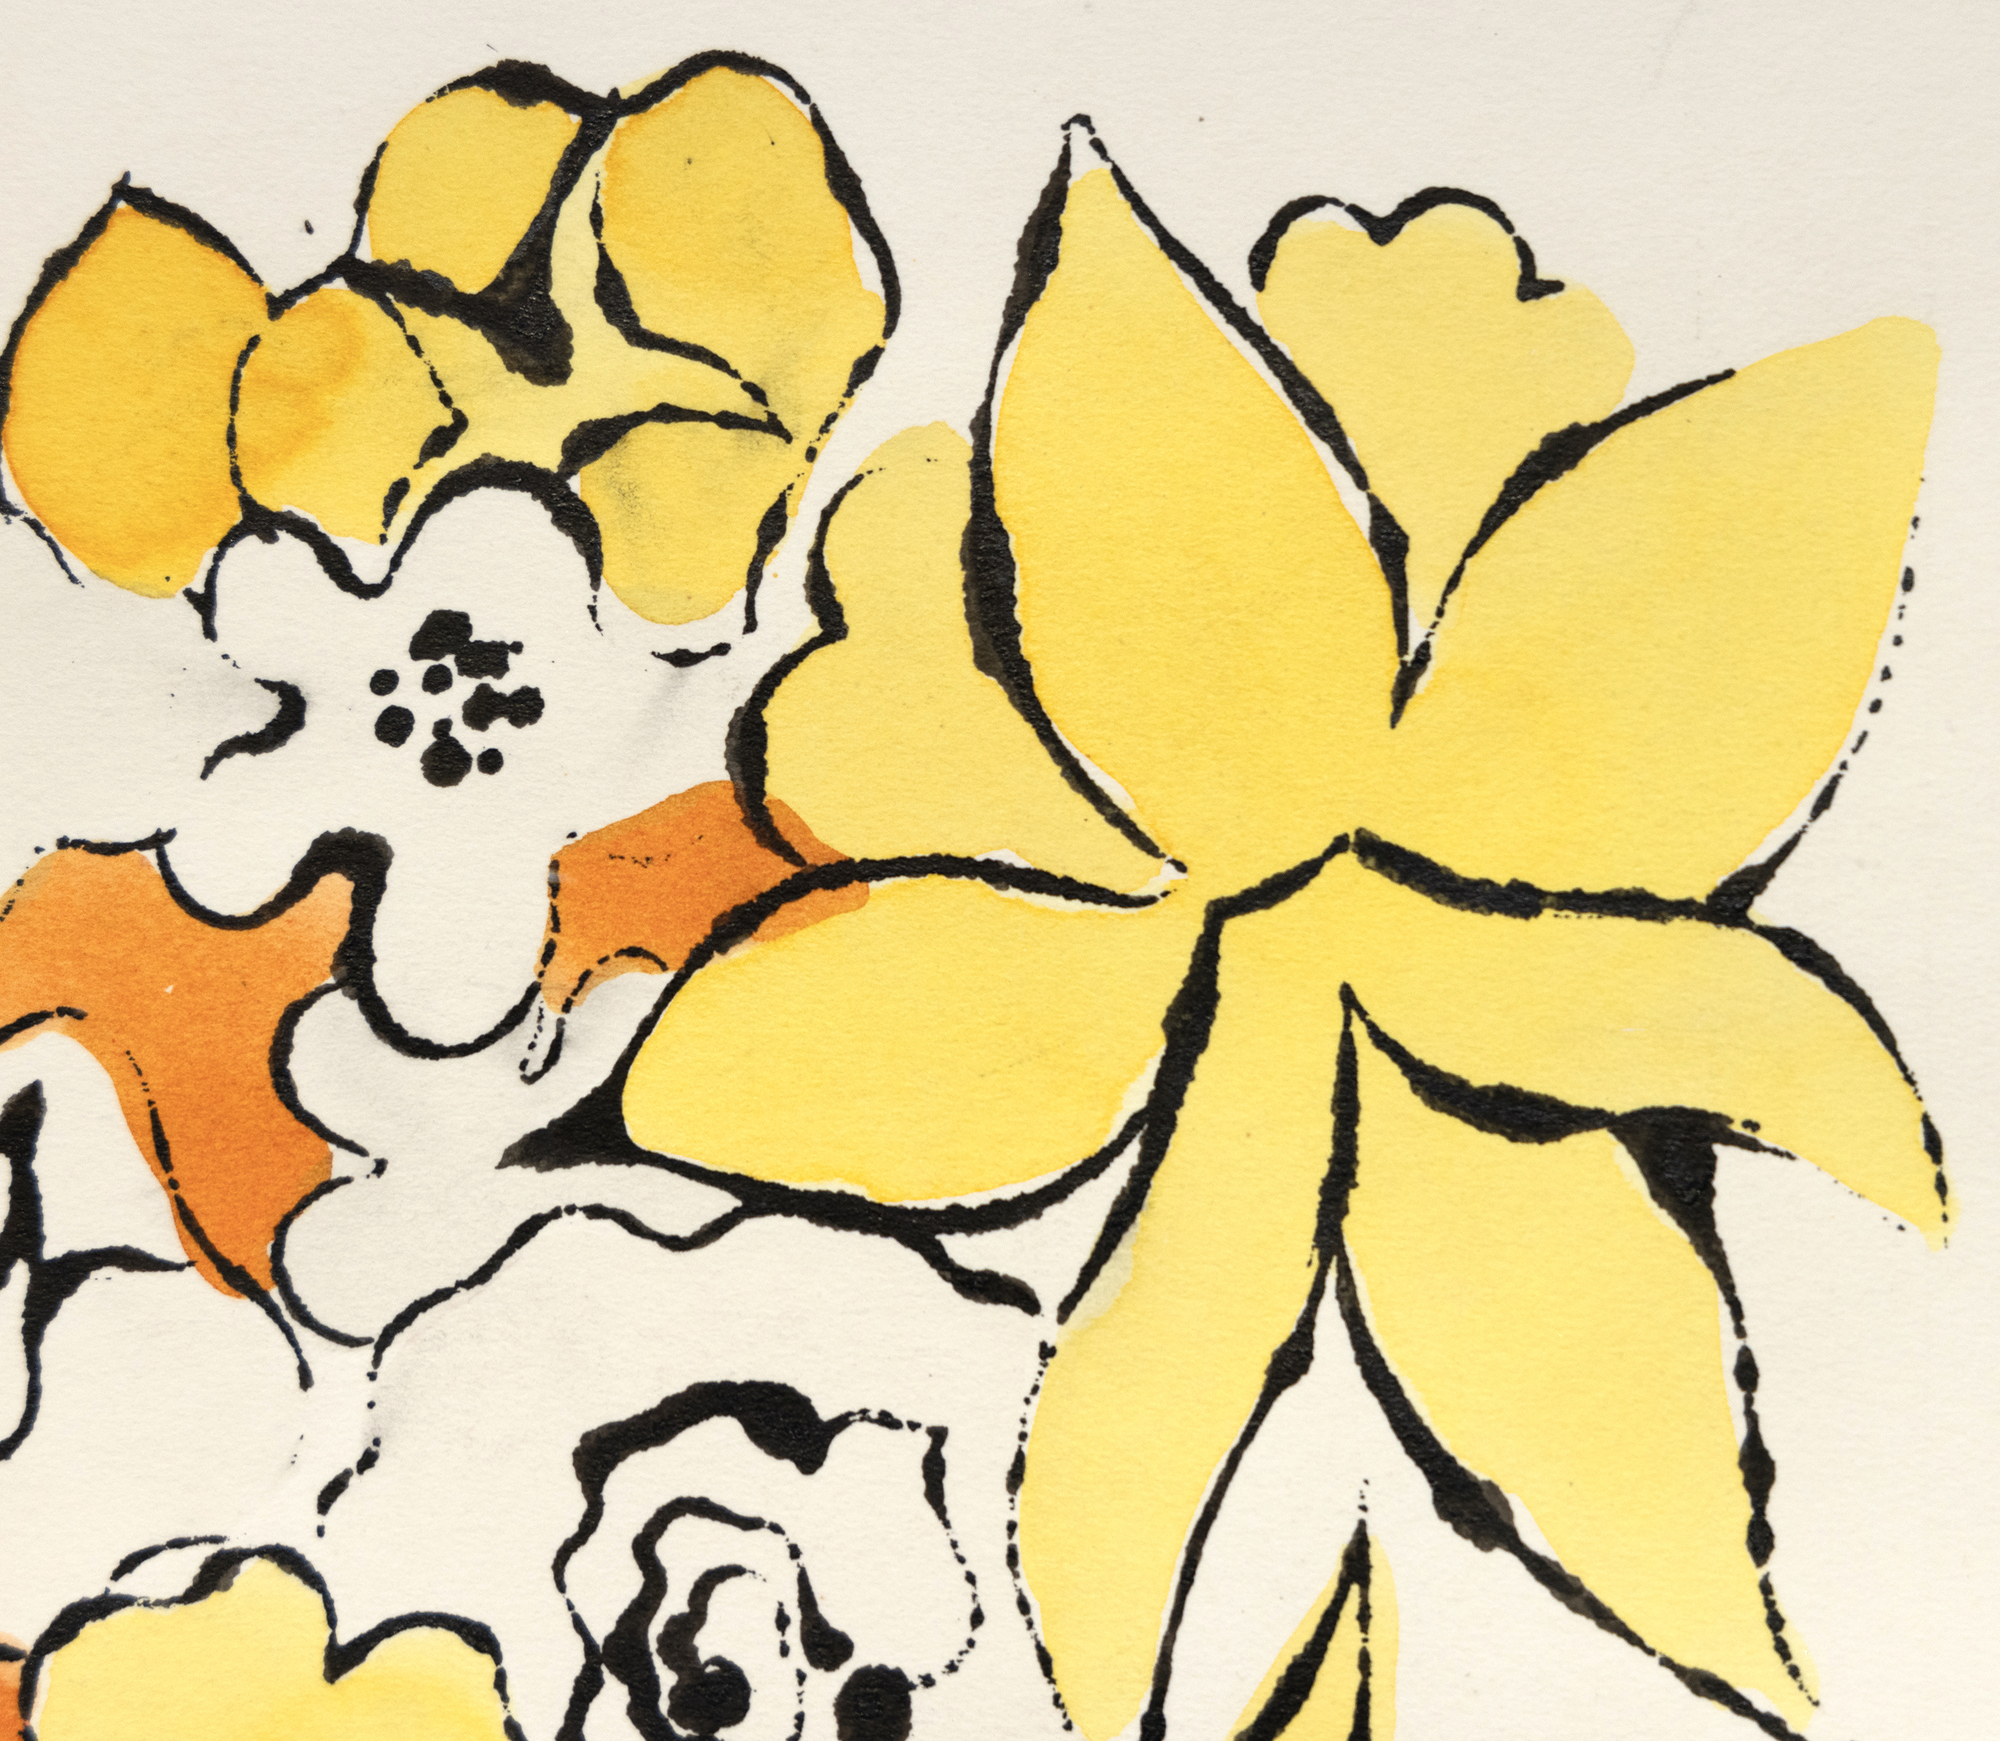 Often overlooked, Warhol's ink and color dye drawings display his knack for reducing motifs and elements to their essential nature using an economy of line and a wonderful playfulness that characterizes each. They often remind us that art can best be effective purveyors of humor and whimsy if uncomplicated and free-flowing. Untitled, Flowers is a forerunning of his famous 1960 Vogue layout, combining drawings of flowers in fluorescent colors. It anticipates Warhol's early inclination to separate line from color, a device that would later give his silkscreen images their abstract immediacy.